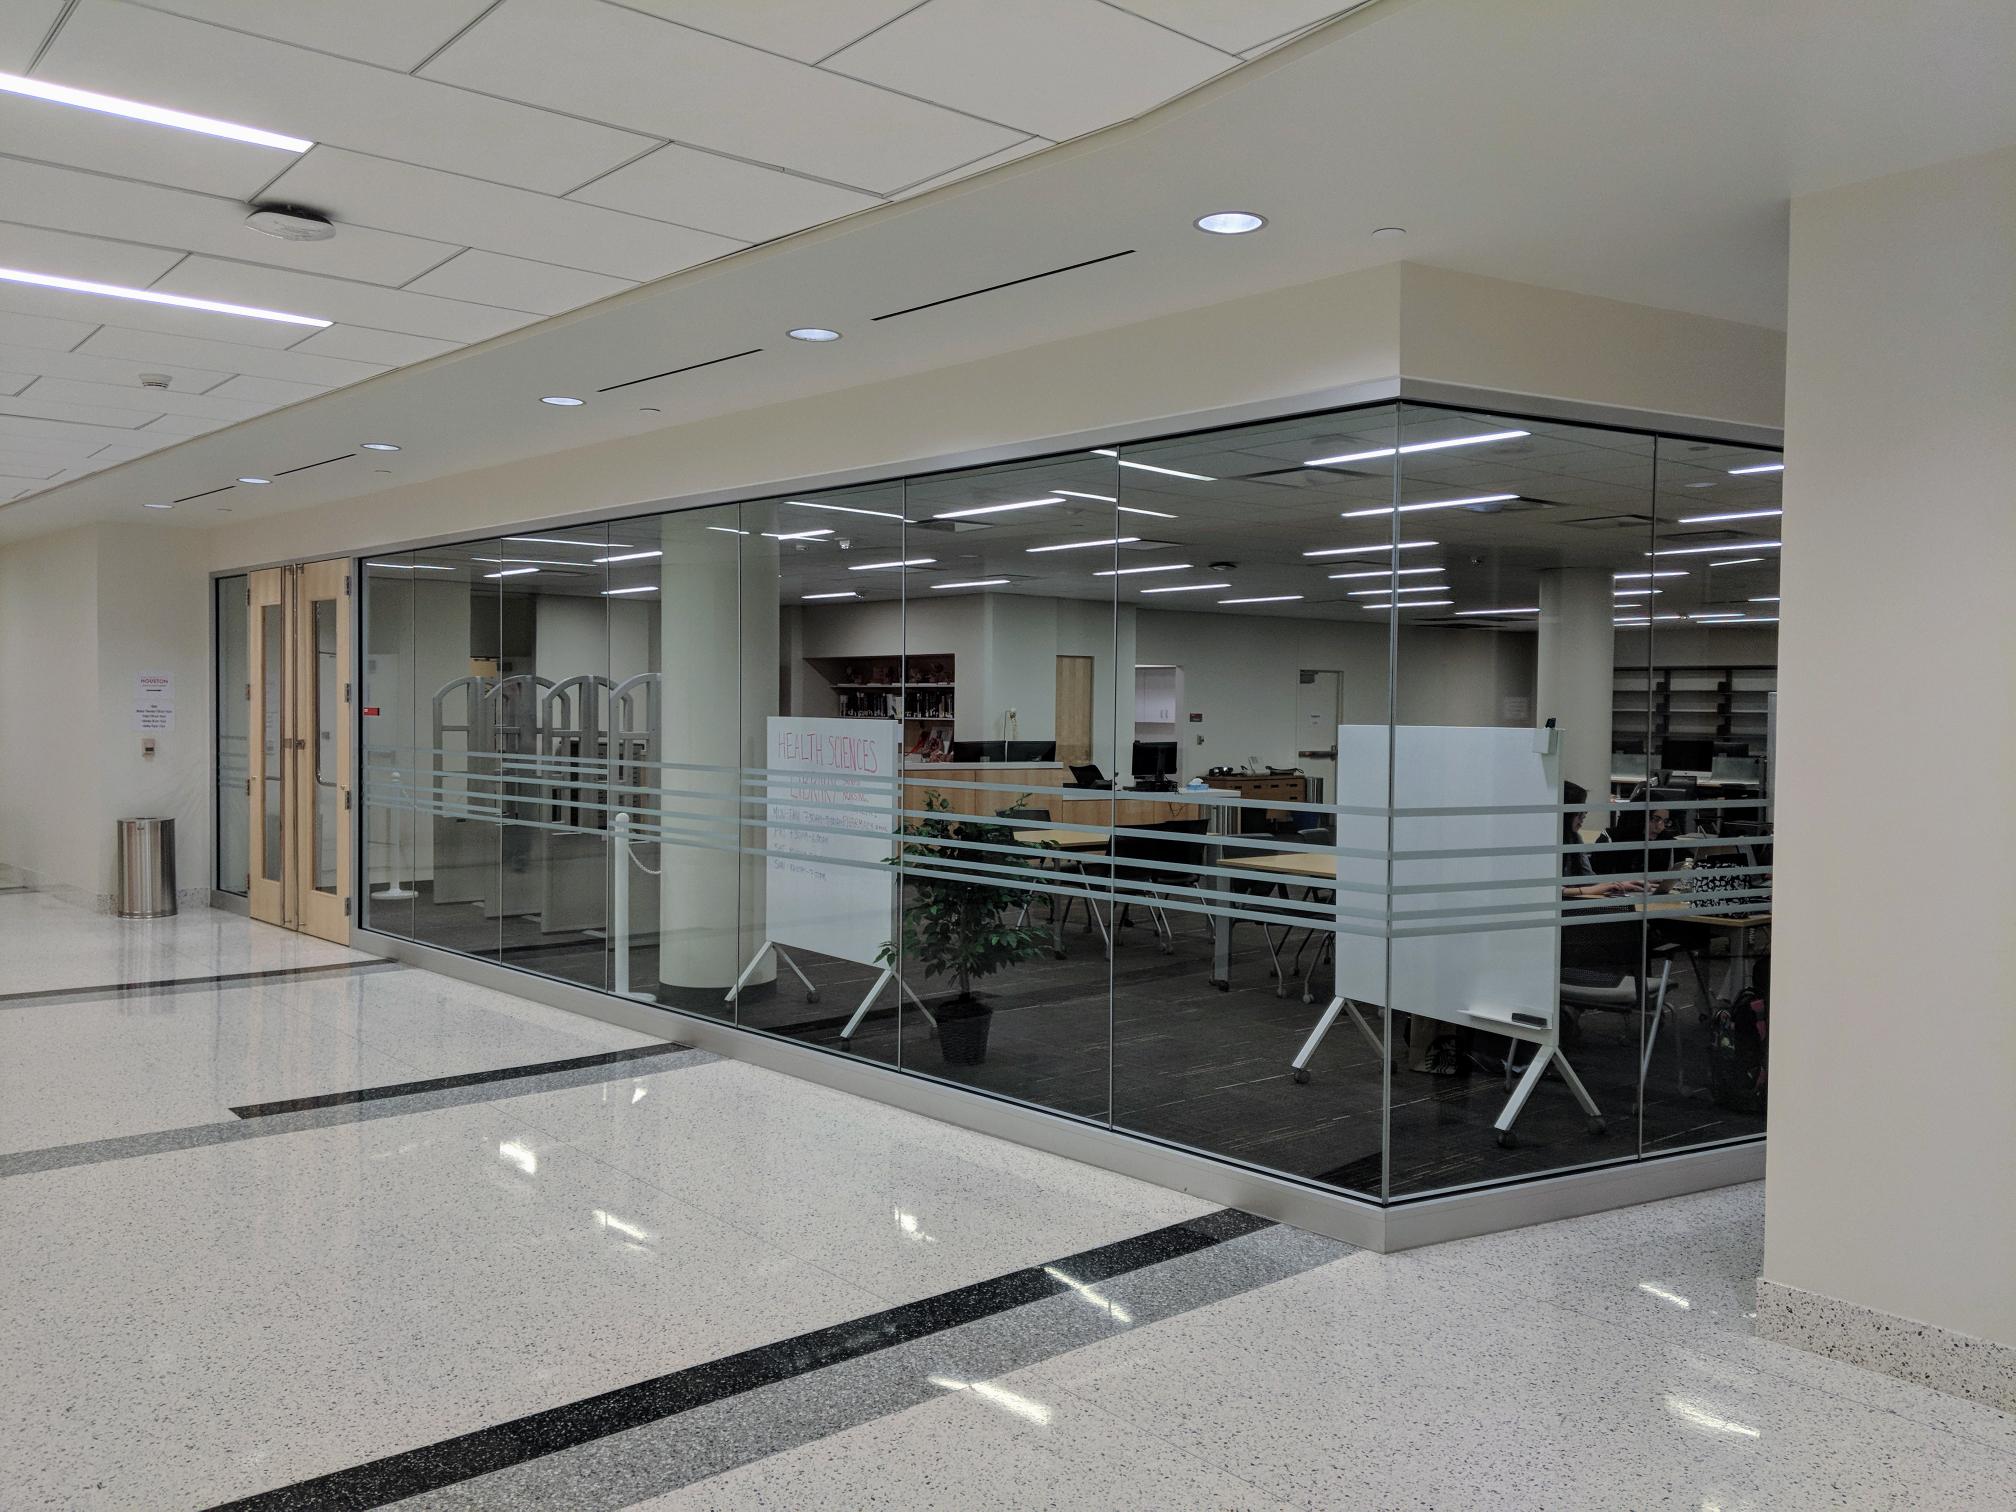 View of the Health Sciences Library from the hallway of Health 1 building